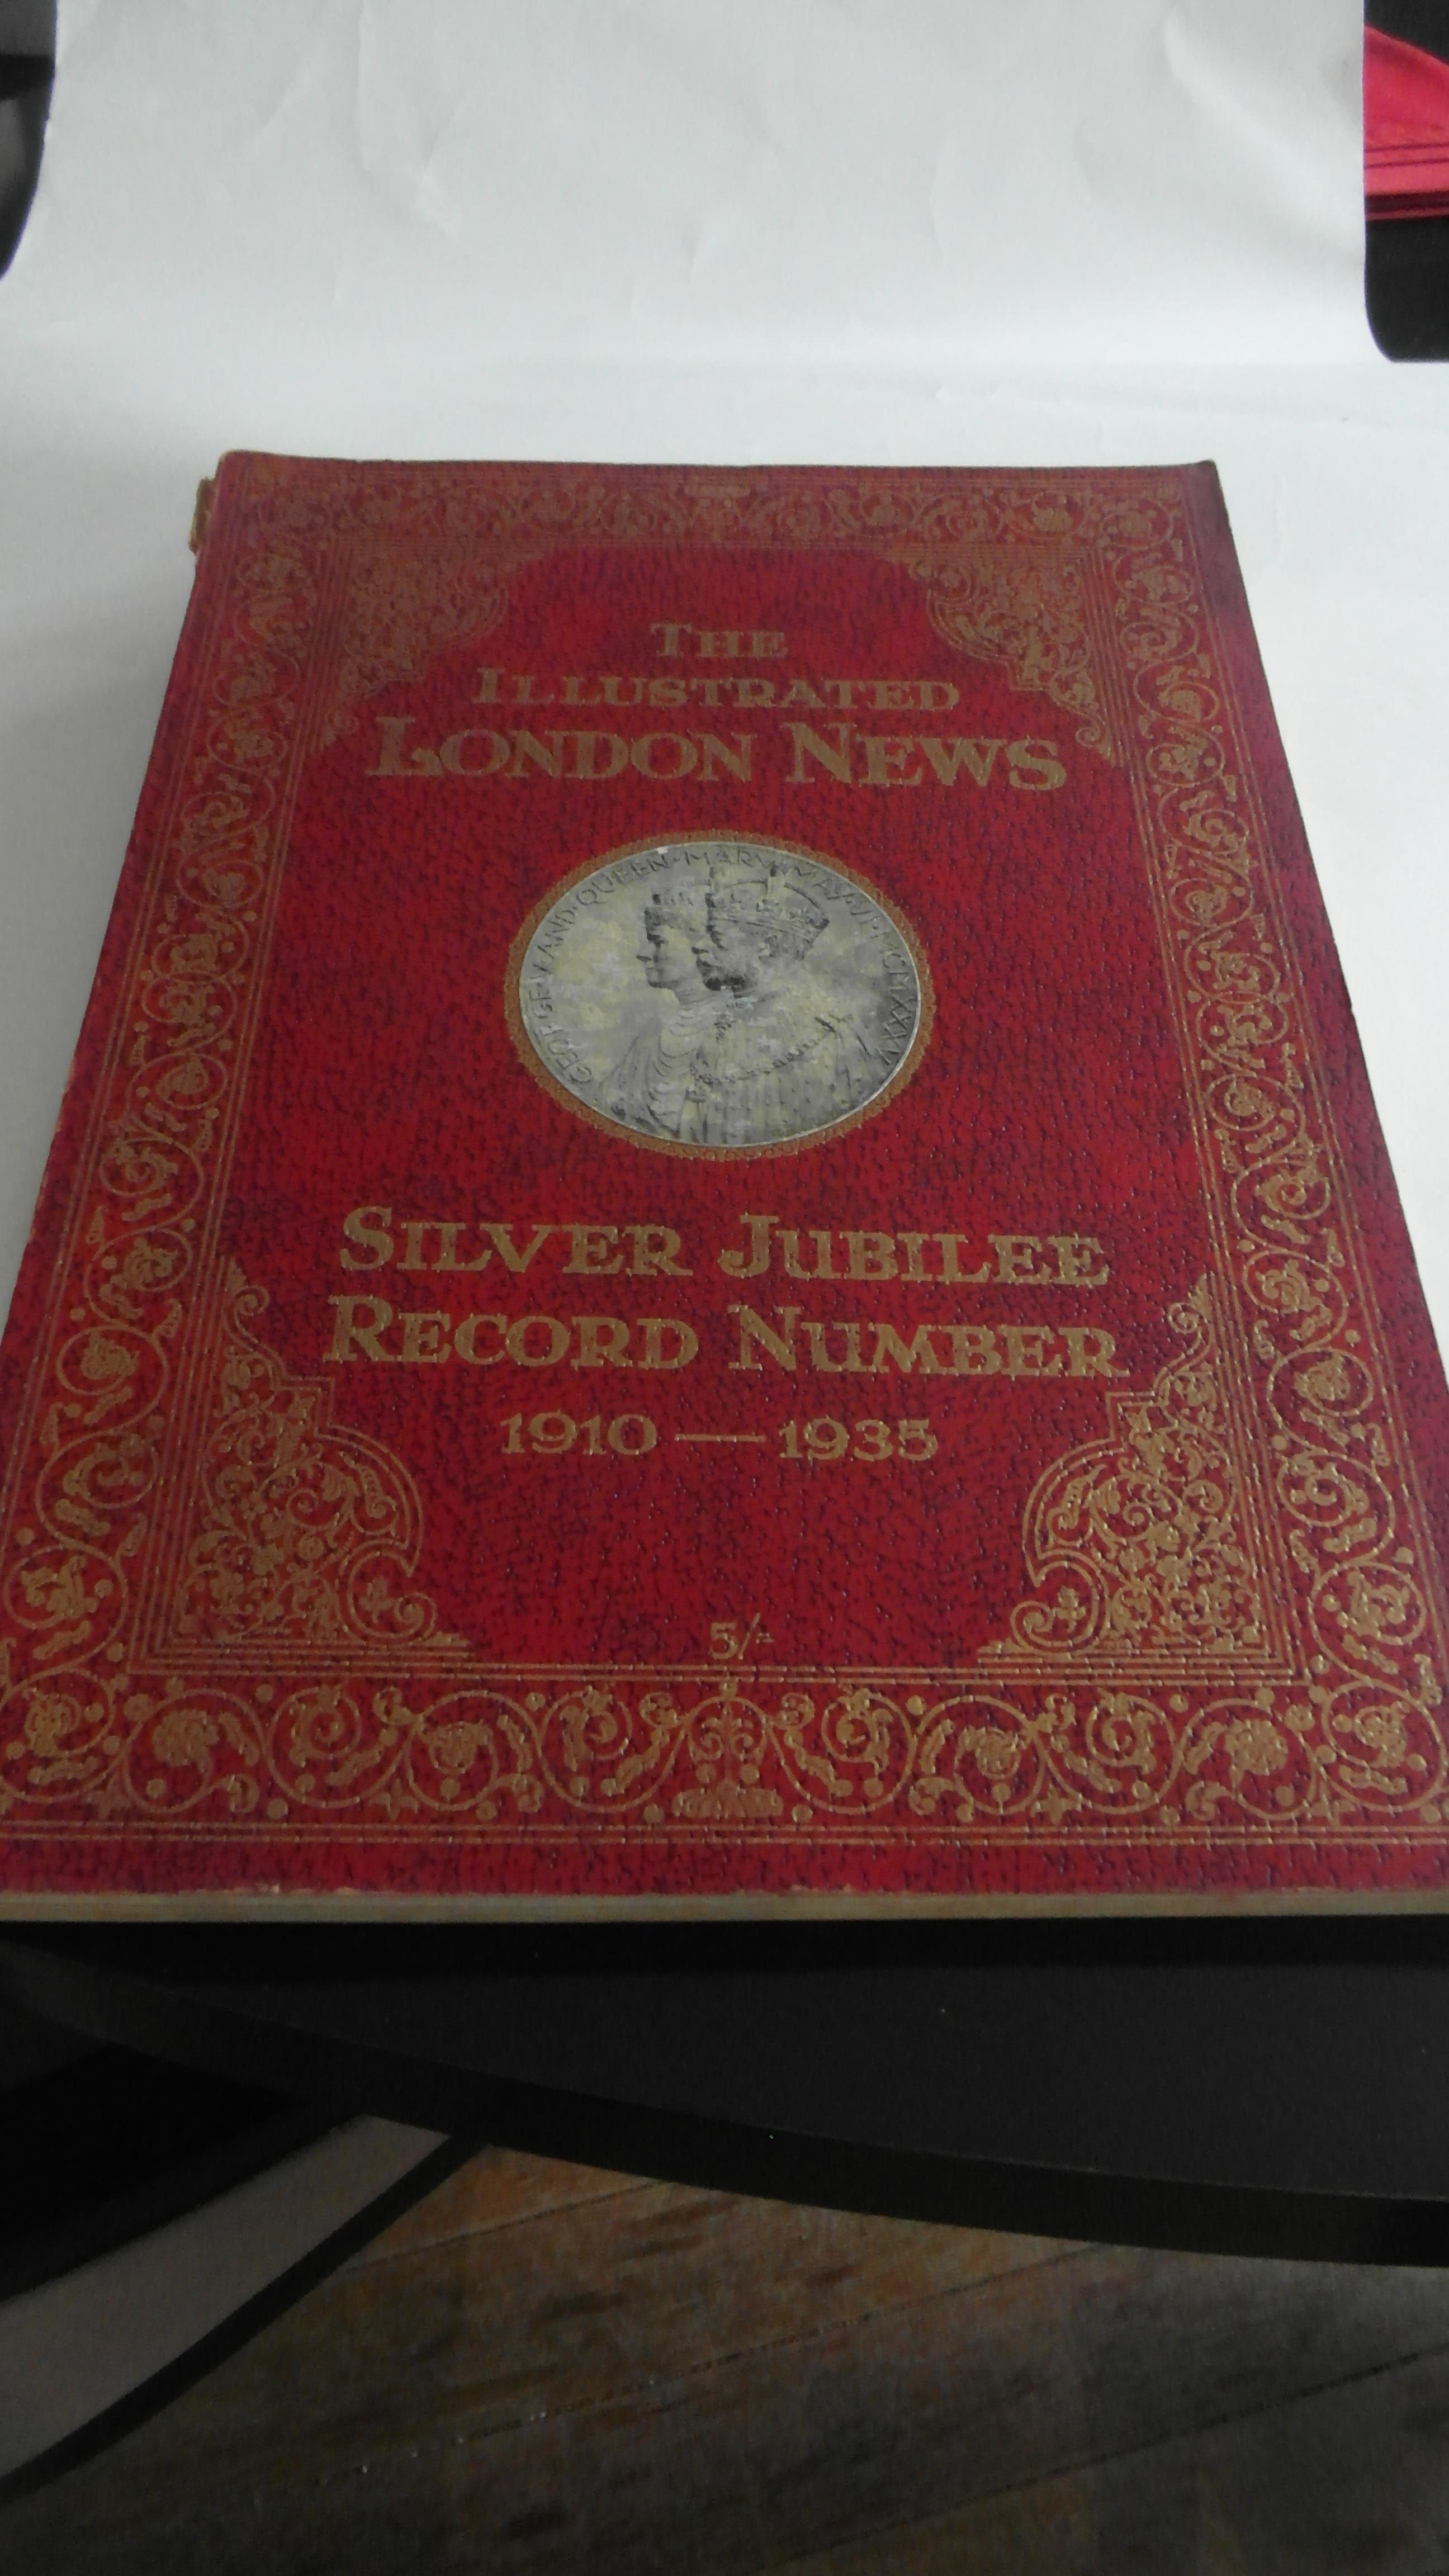 QUITE RARE, THE ILLUSTRATED LONDON NEWS - SILVER JUBILEE GEORGE V (1910-1935)